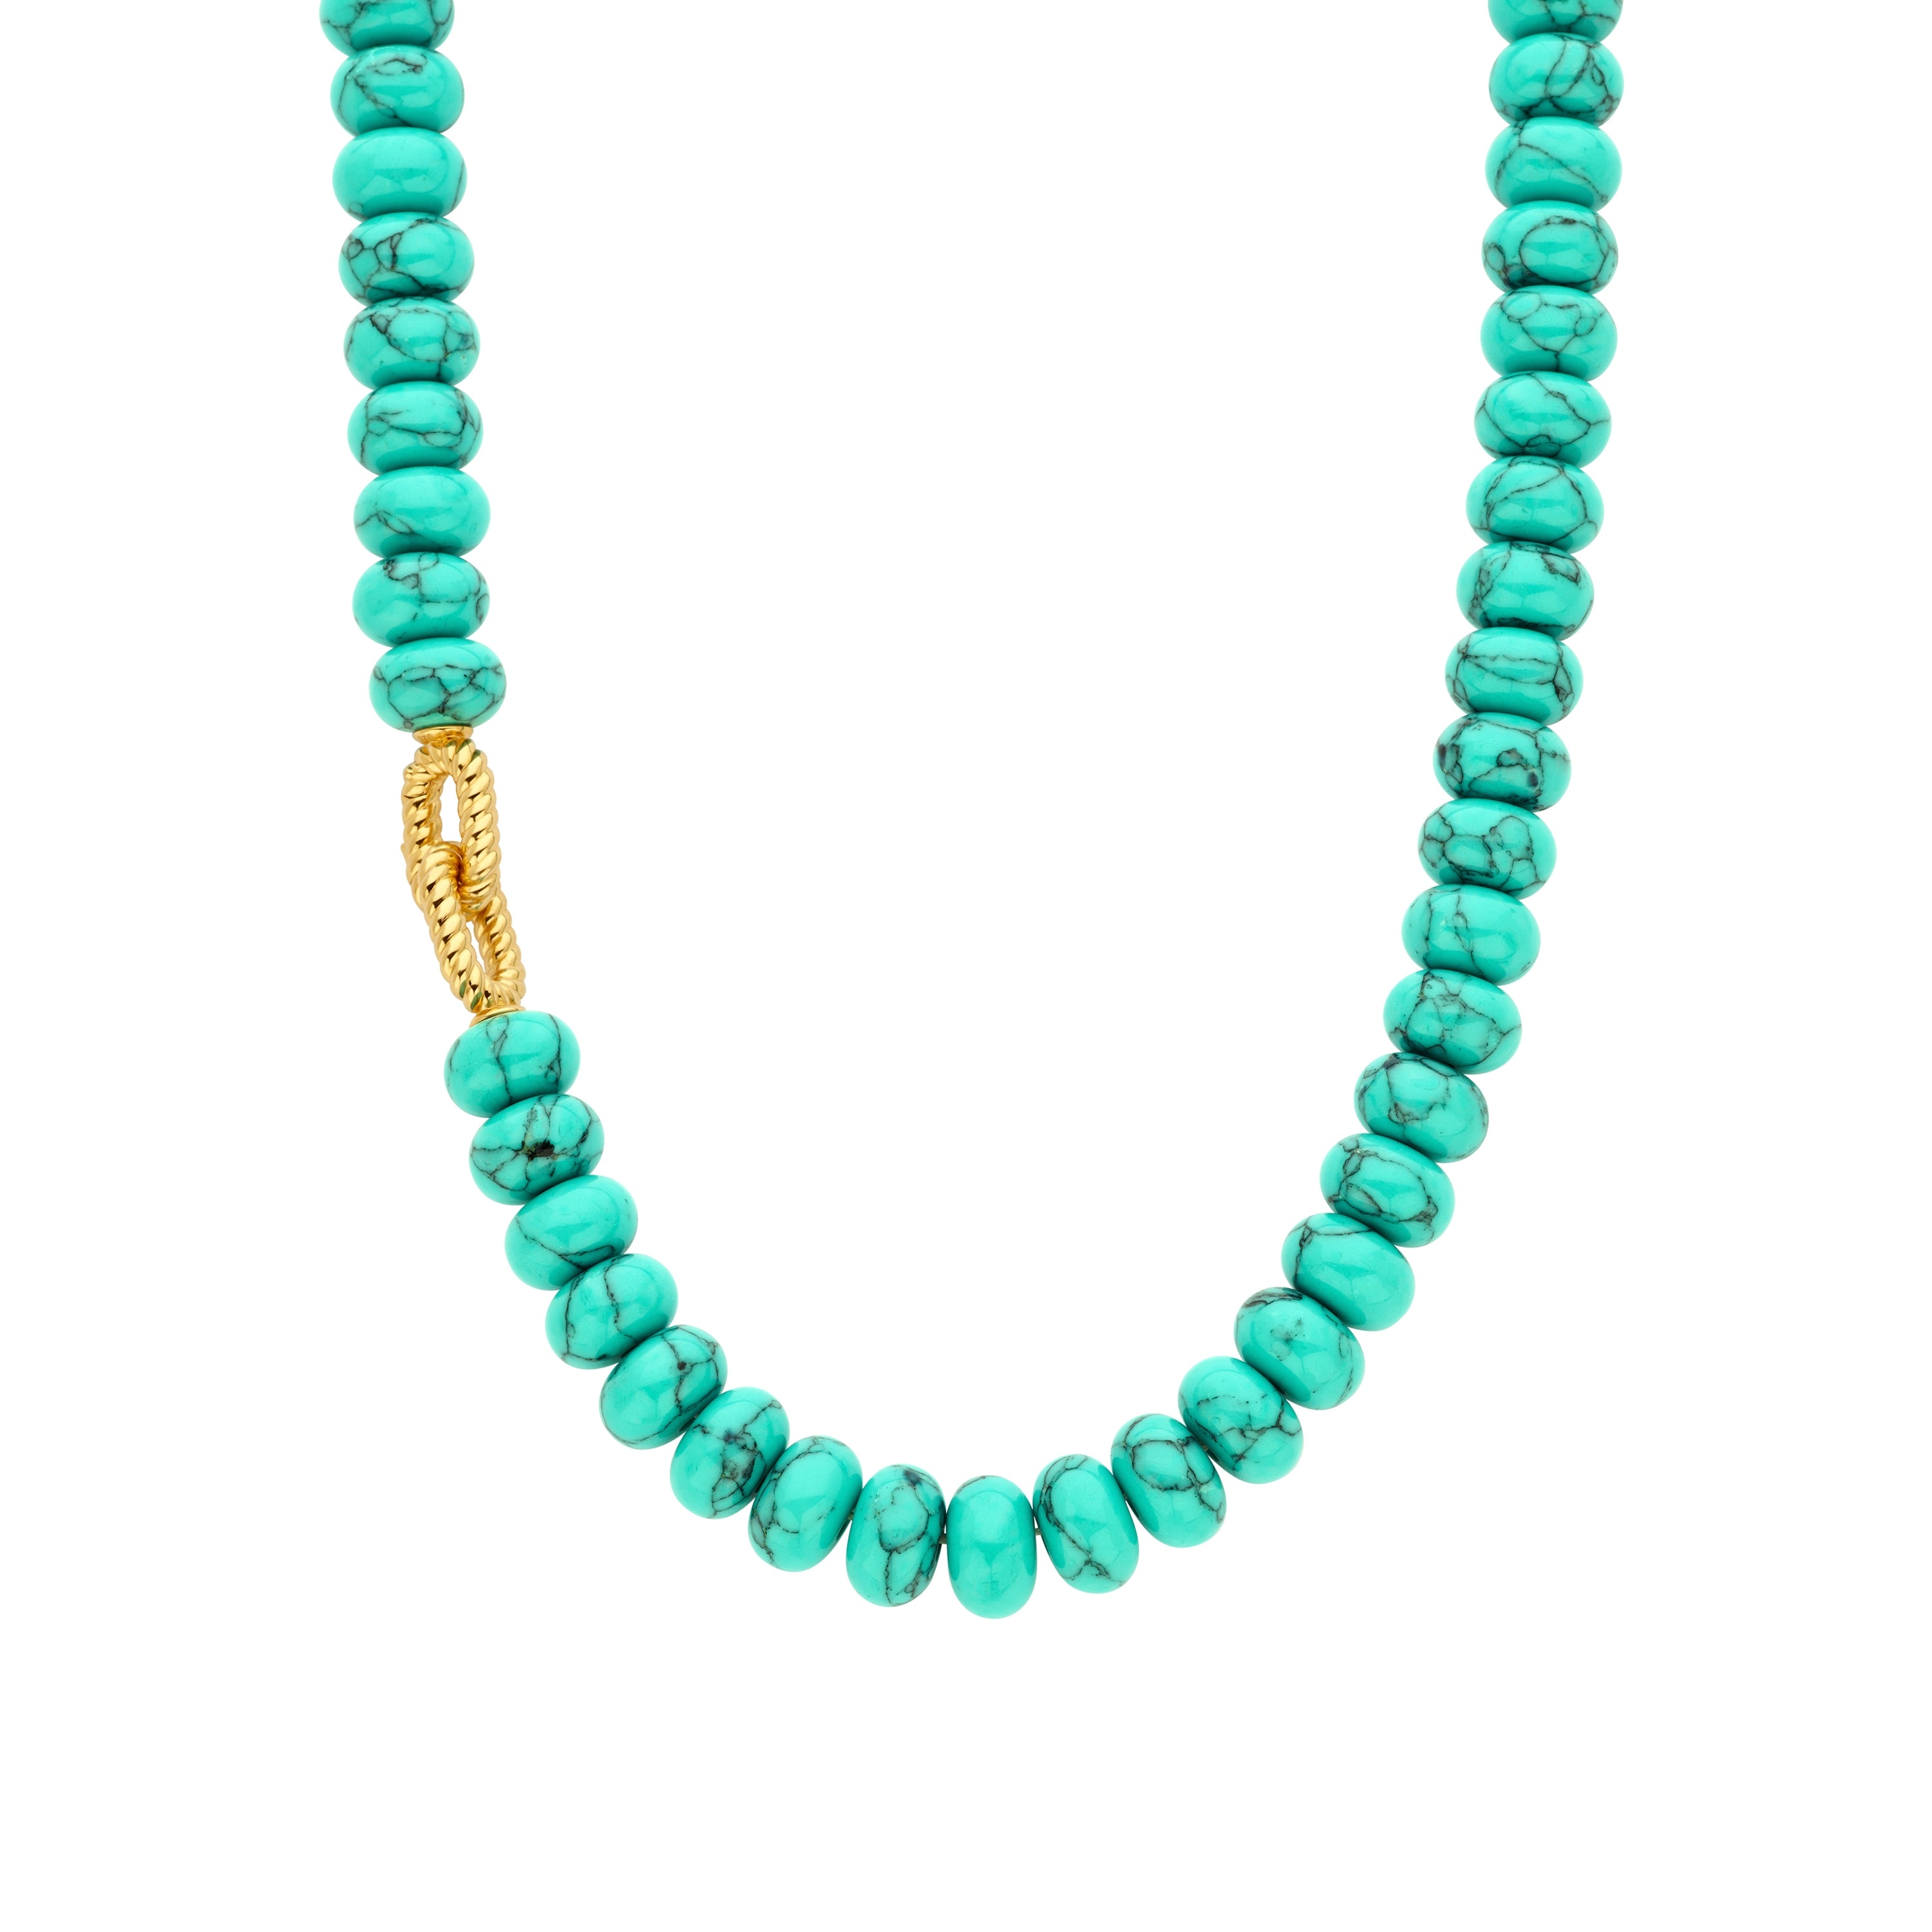 Tropical Turquoise Bead Necklace